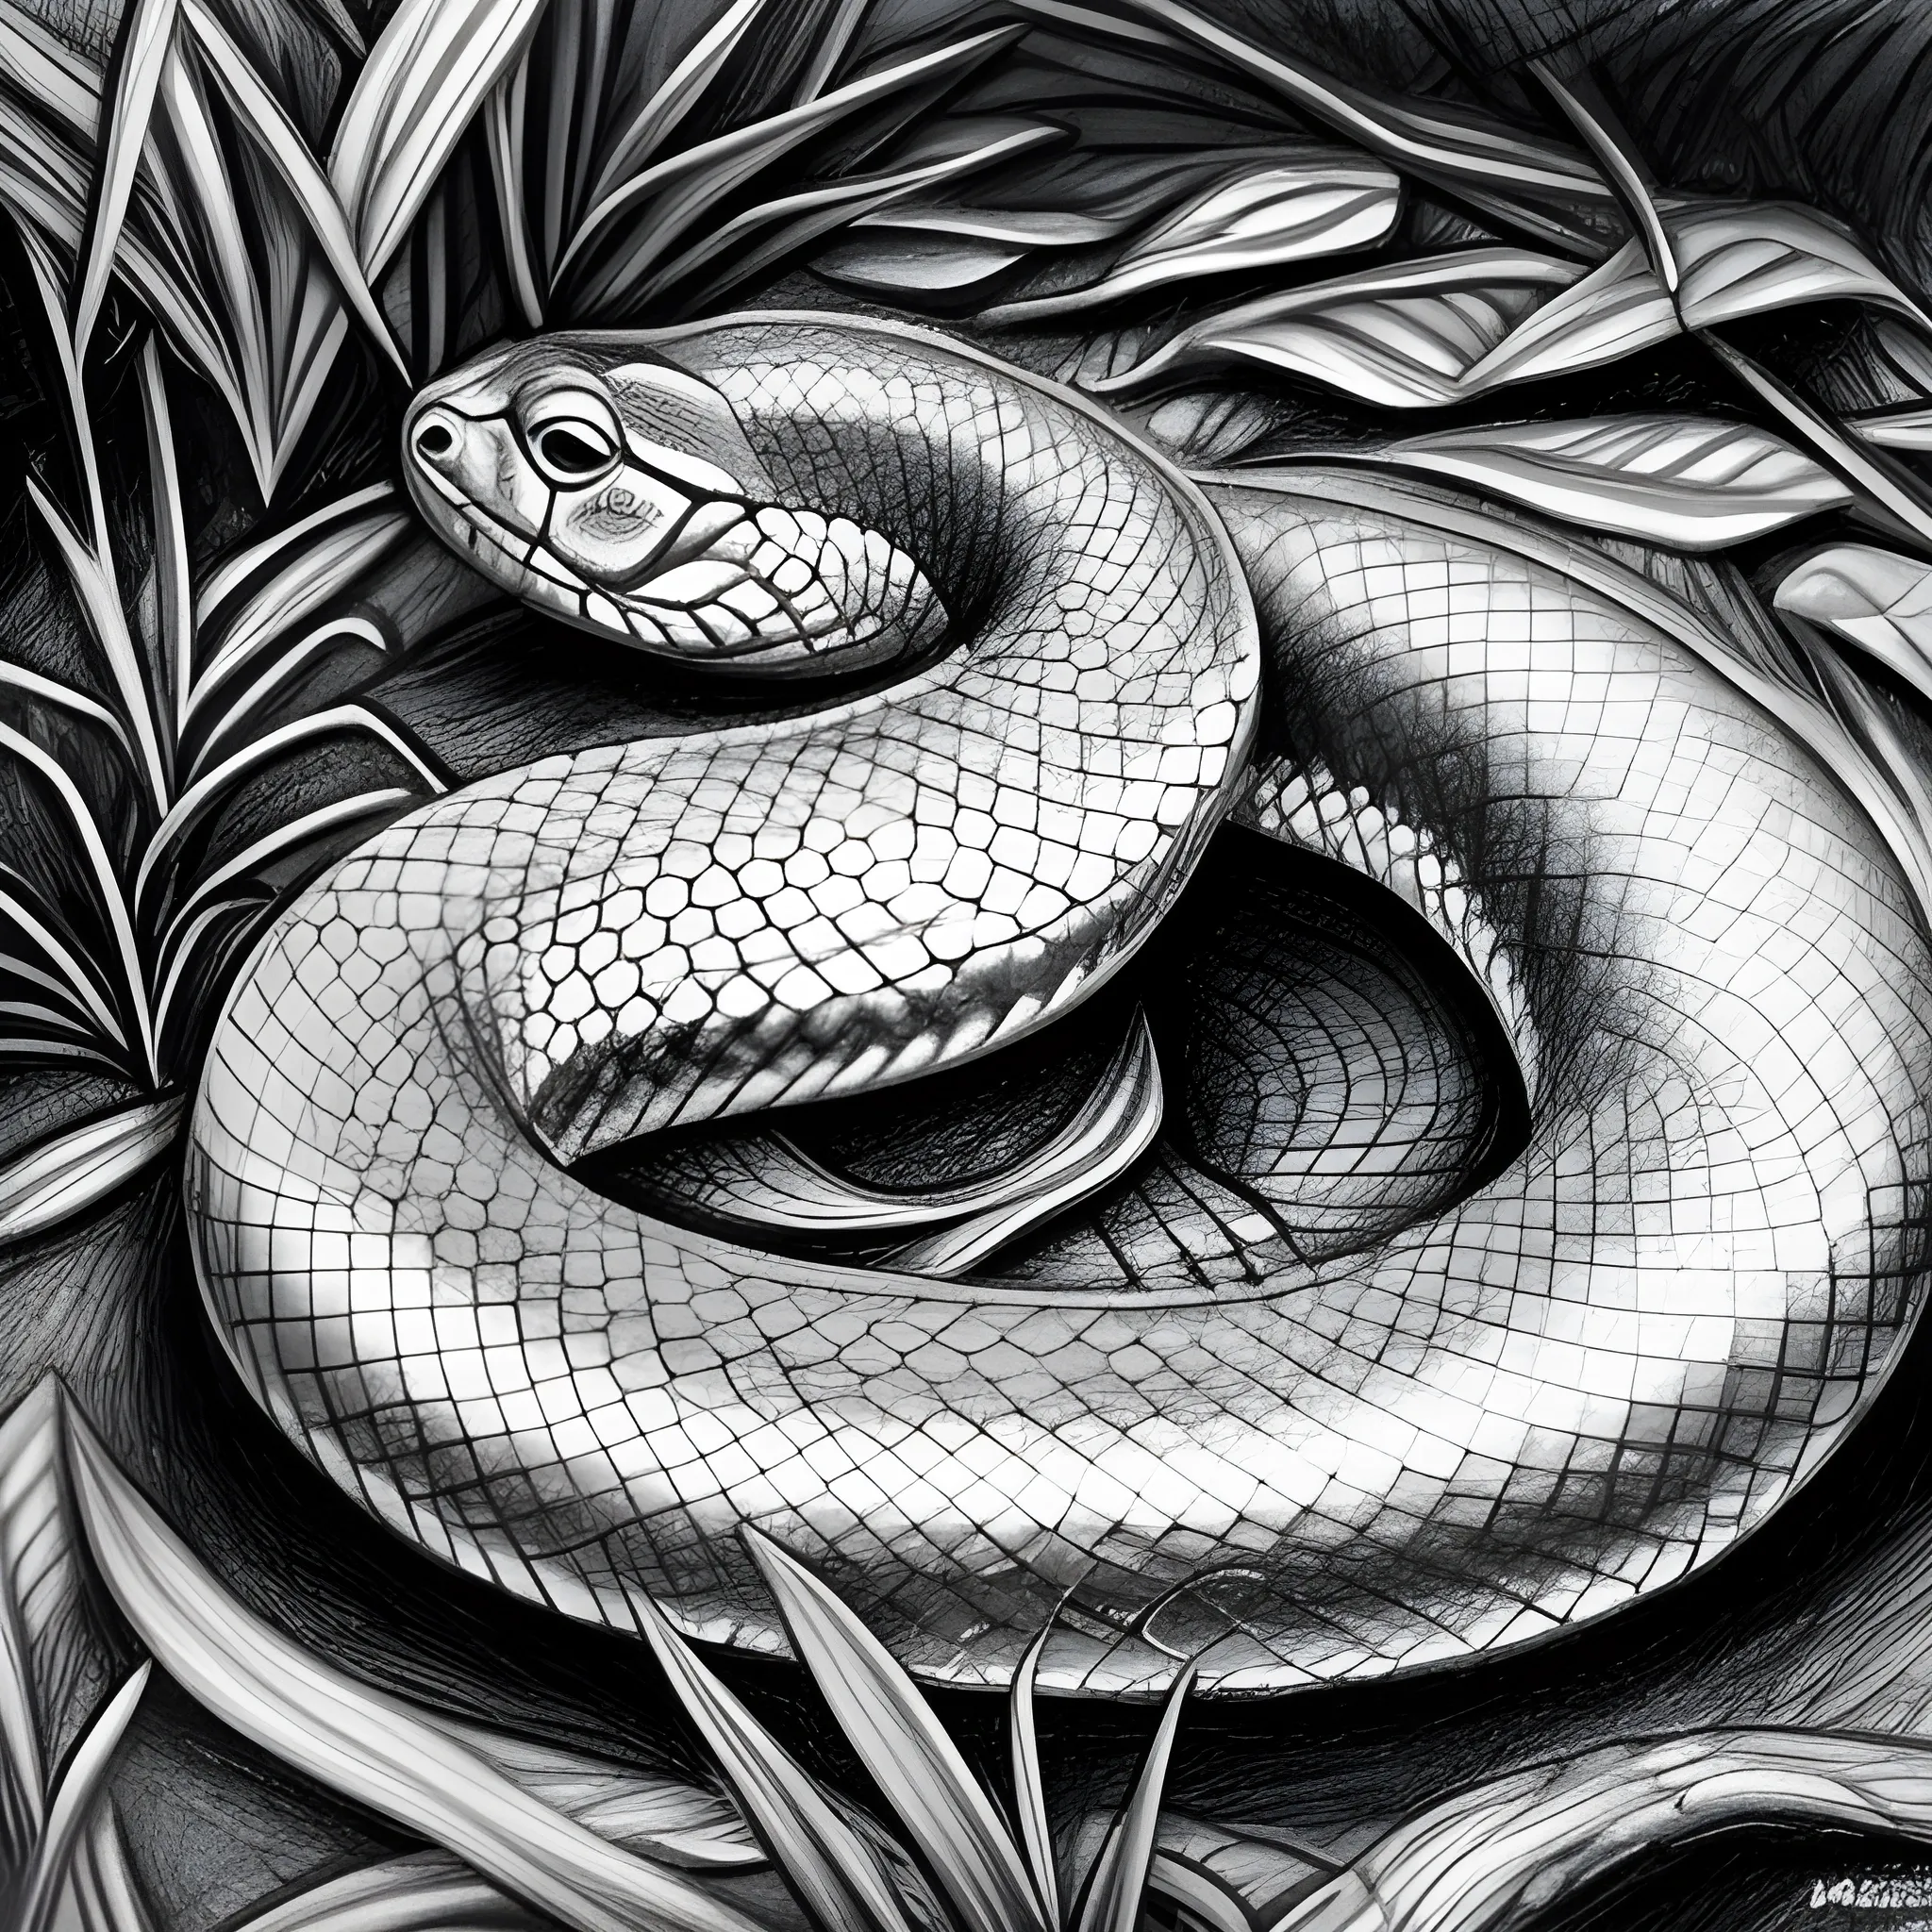 1,316 Snake Pencil Drawing Images, Stock Photos, 3D objects, & Vectors |  Shutterstock